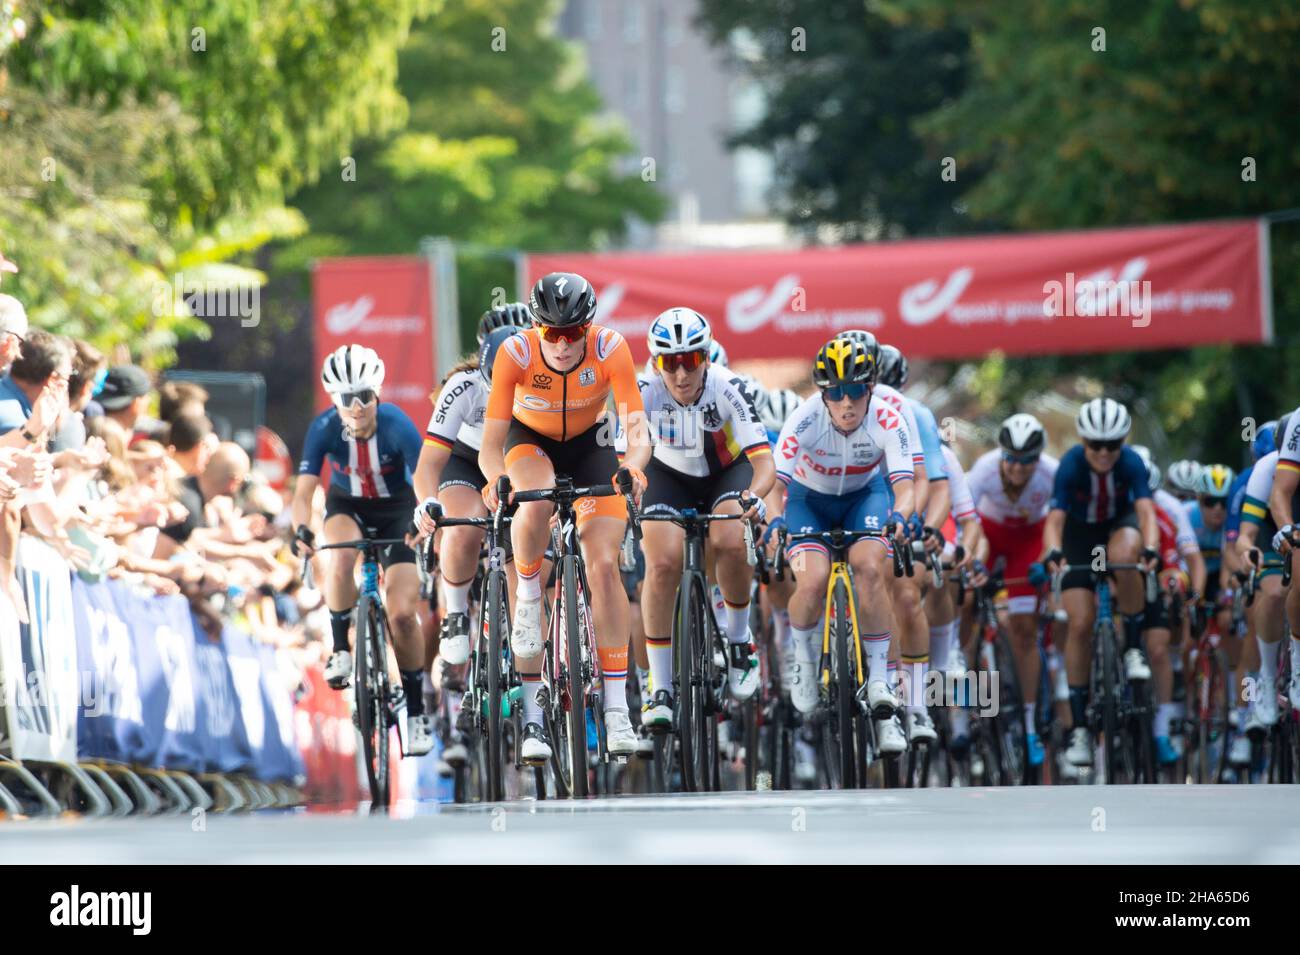 The women's peloton on a climb in Leuven, Belgium during the UCI Road Cycling World Championships. Stock Photo